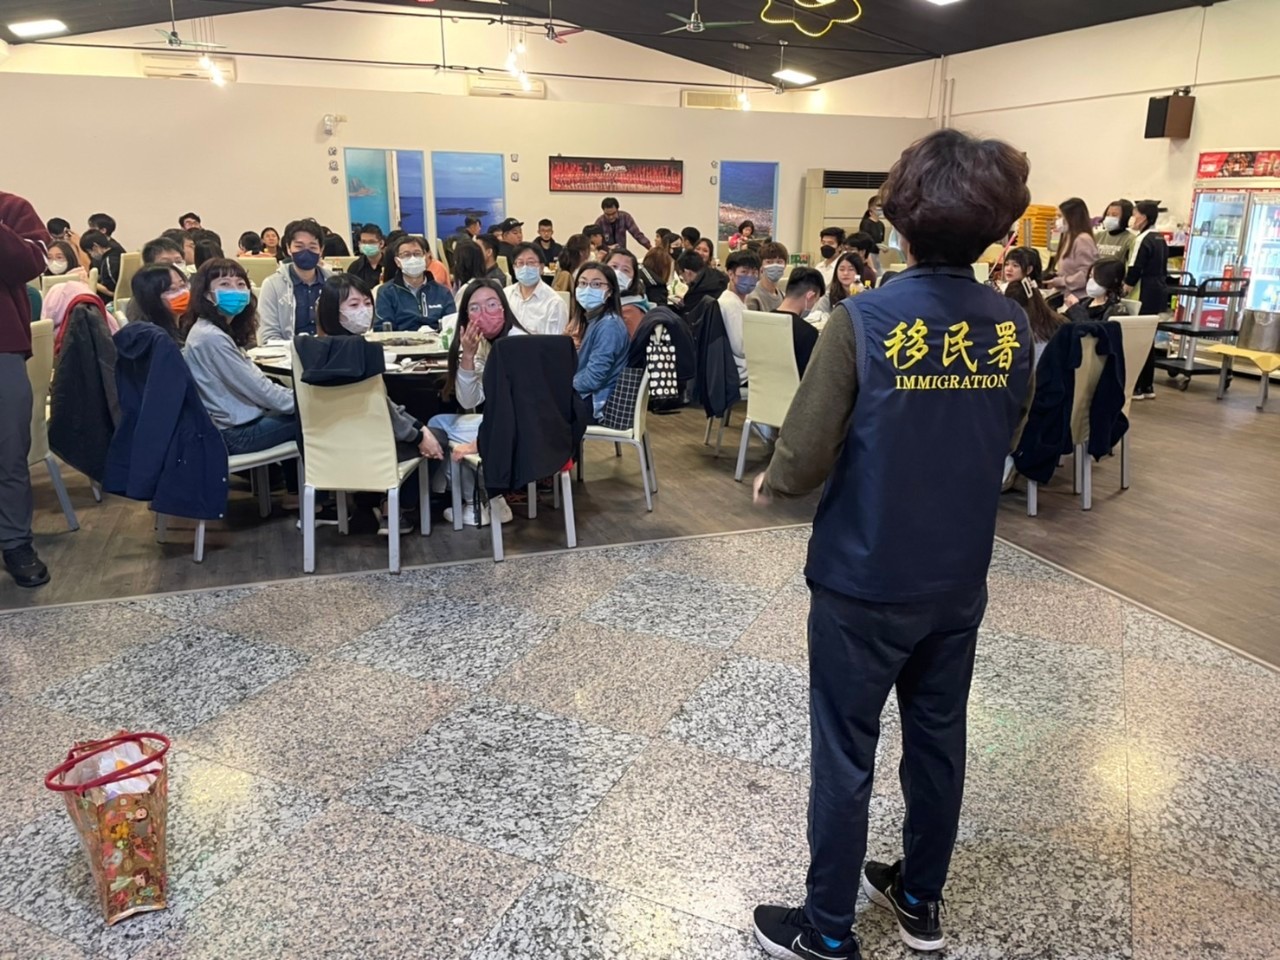 NIA Yunlin County Service Center reminds foreign student to be cautious at part-time jobs during Spring Festival. Picture reproduced from Yunlin County Service Center